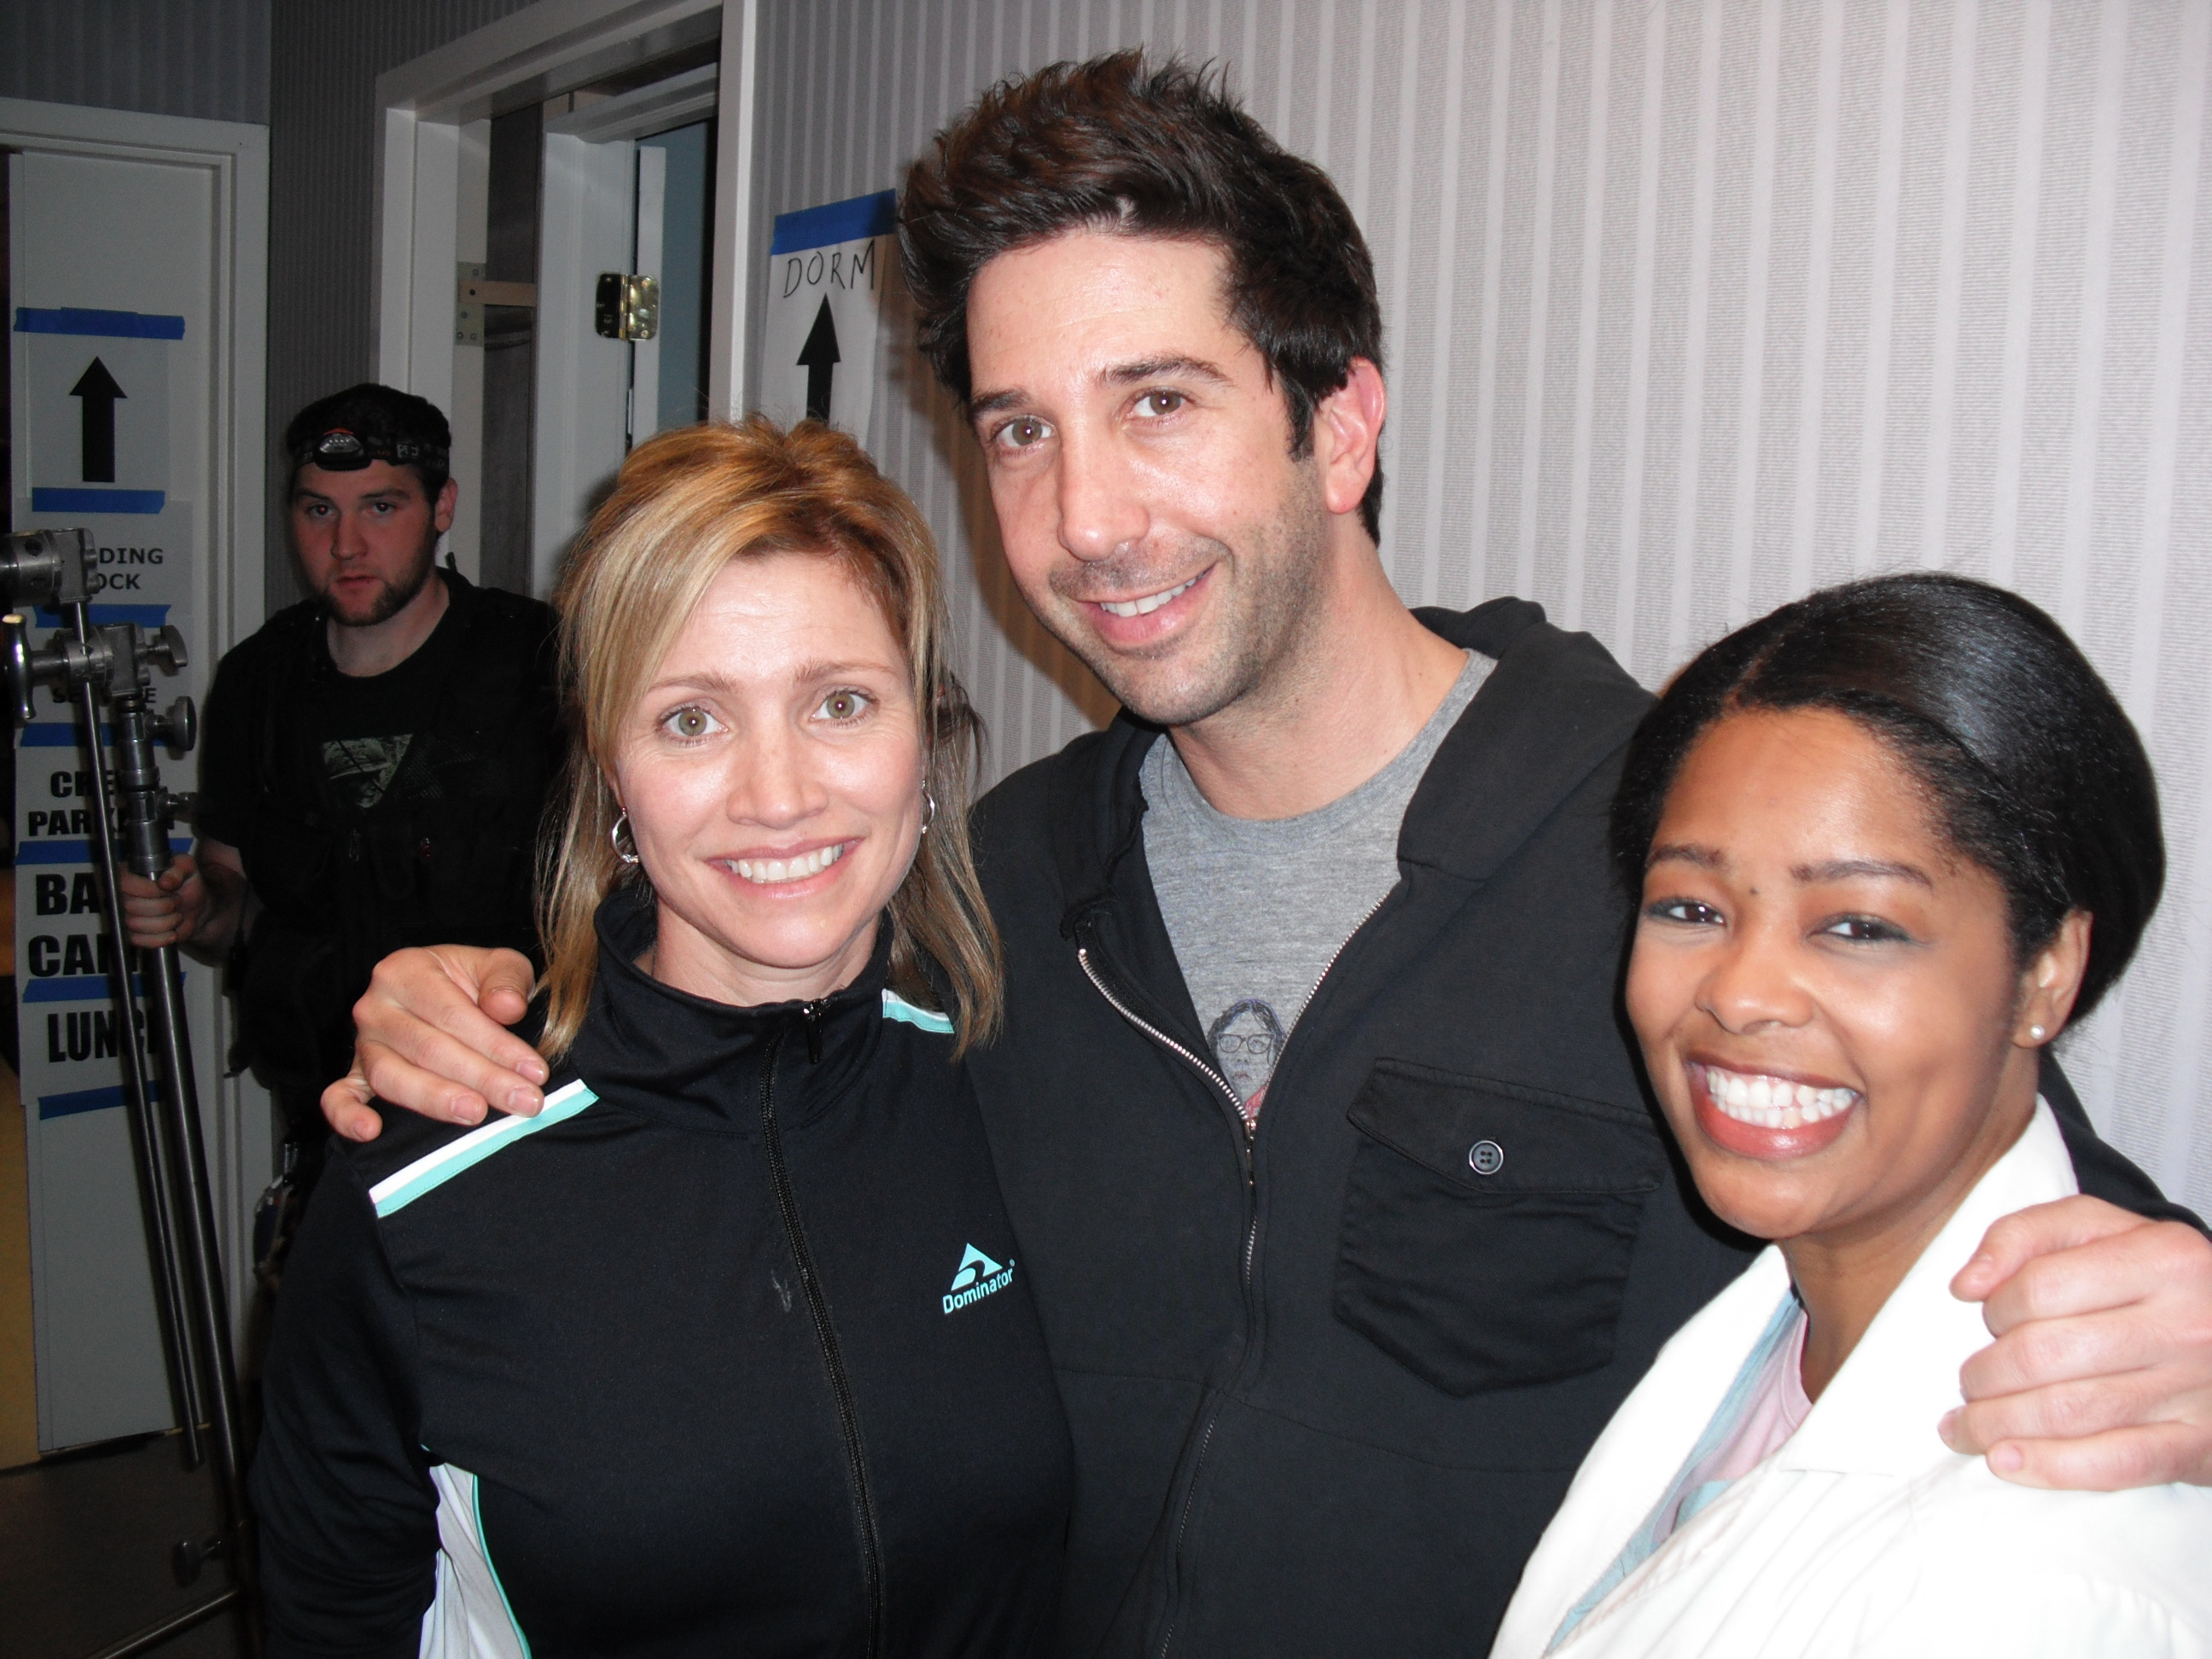 David Schwimmer, director of Trust with actresses Jennifer Kincer and Anthonia Kitchen.